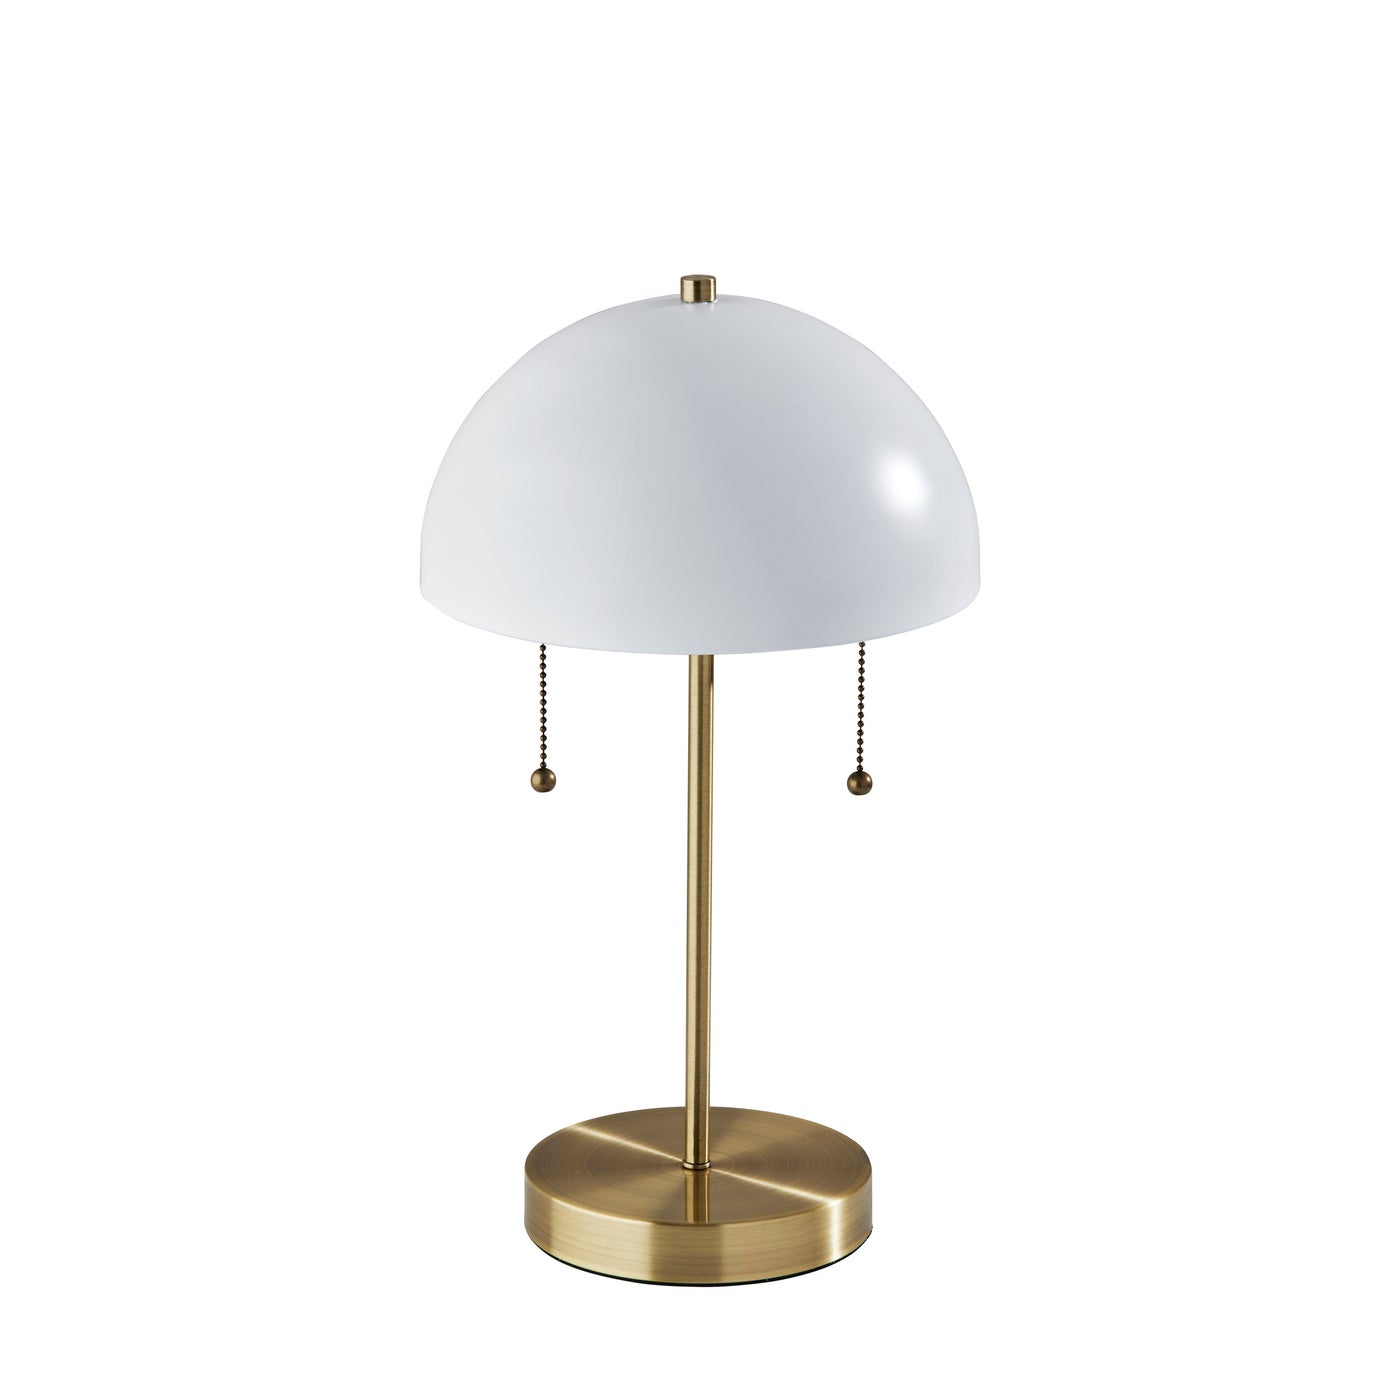 Adesso Home - 5132-02 - Two Light Table Lamp - Bowie - Antique Brass & White